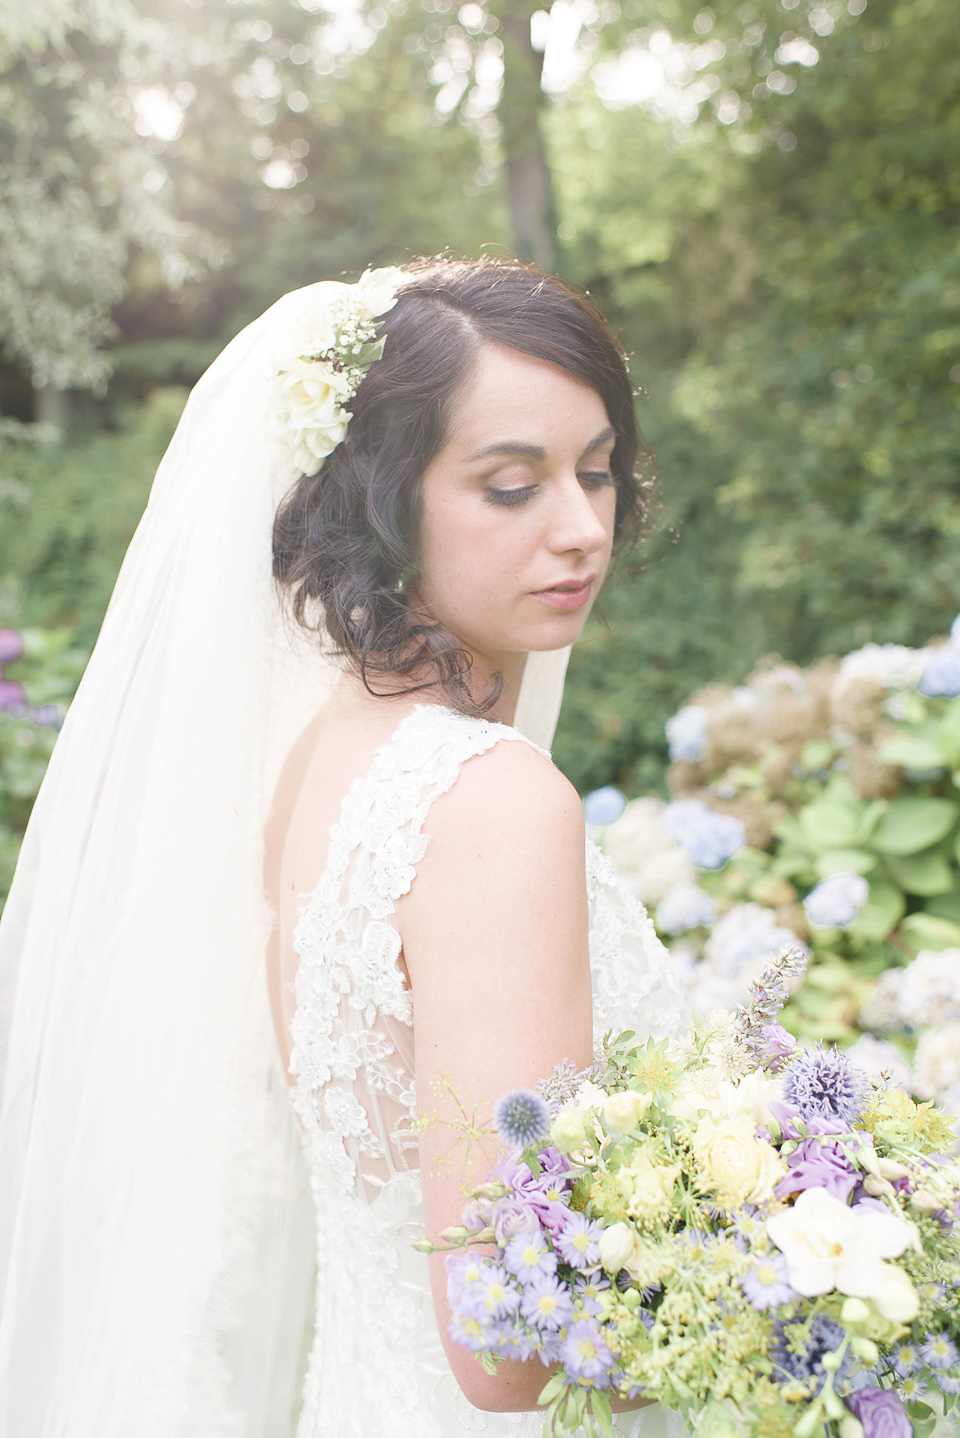 A handmade and rustic, French garden party inspired wedding. Photography by Julie Michaelsen.